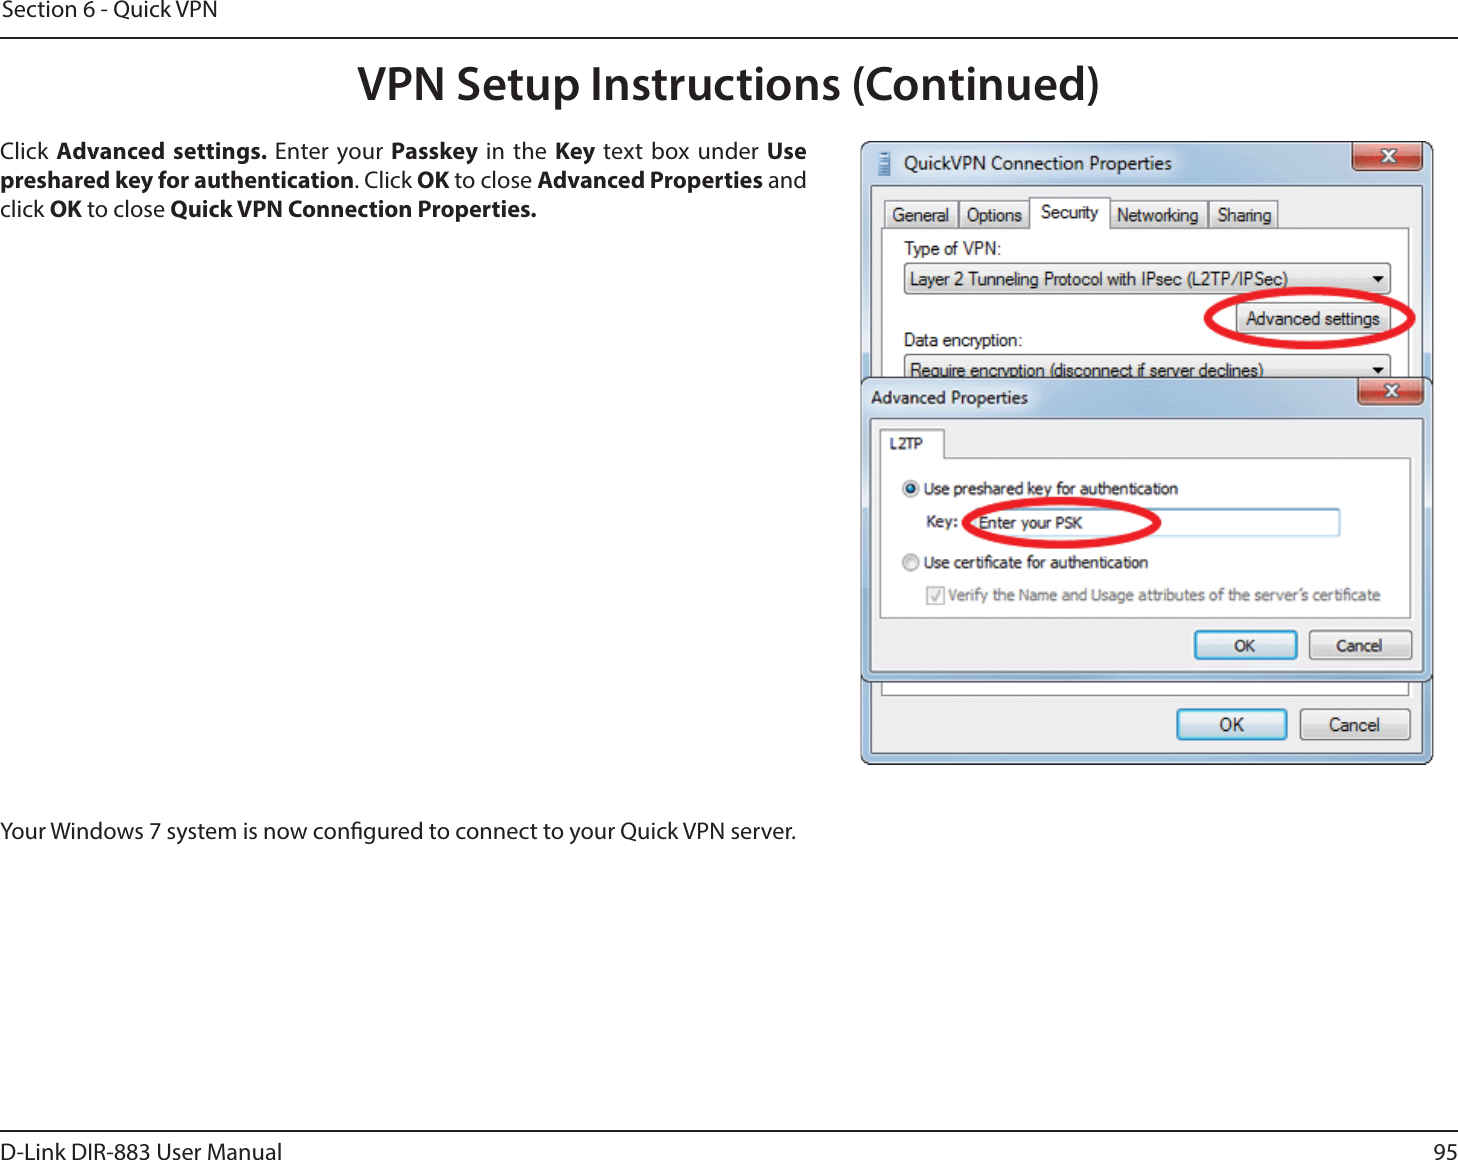 95D-Link DIR-883 User ManualSection 6 - Quick VPNYour Windows 7 system is now congured to connect to your Quick VPN server.Click Advanced settings. Enter your Passkey in the Key text box under Use preshared key for authentication. Click OK to close Advanced Properties and click OK to close Quick VPN Connection Properties.VPN Setup Instructions (Continued)